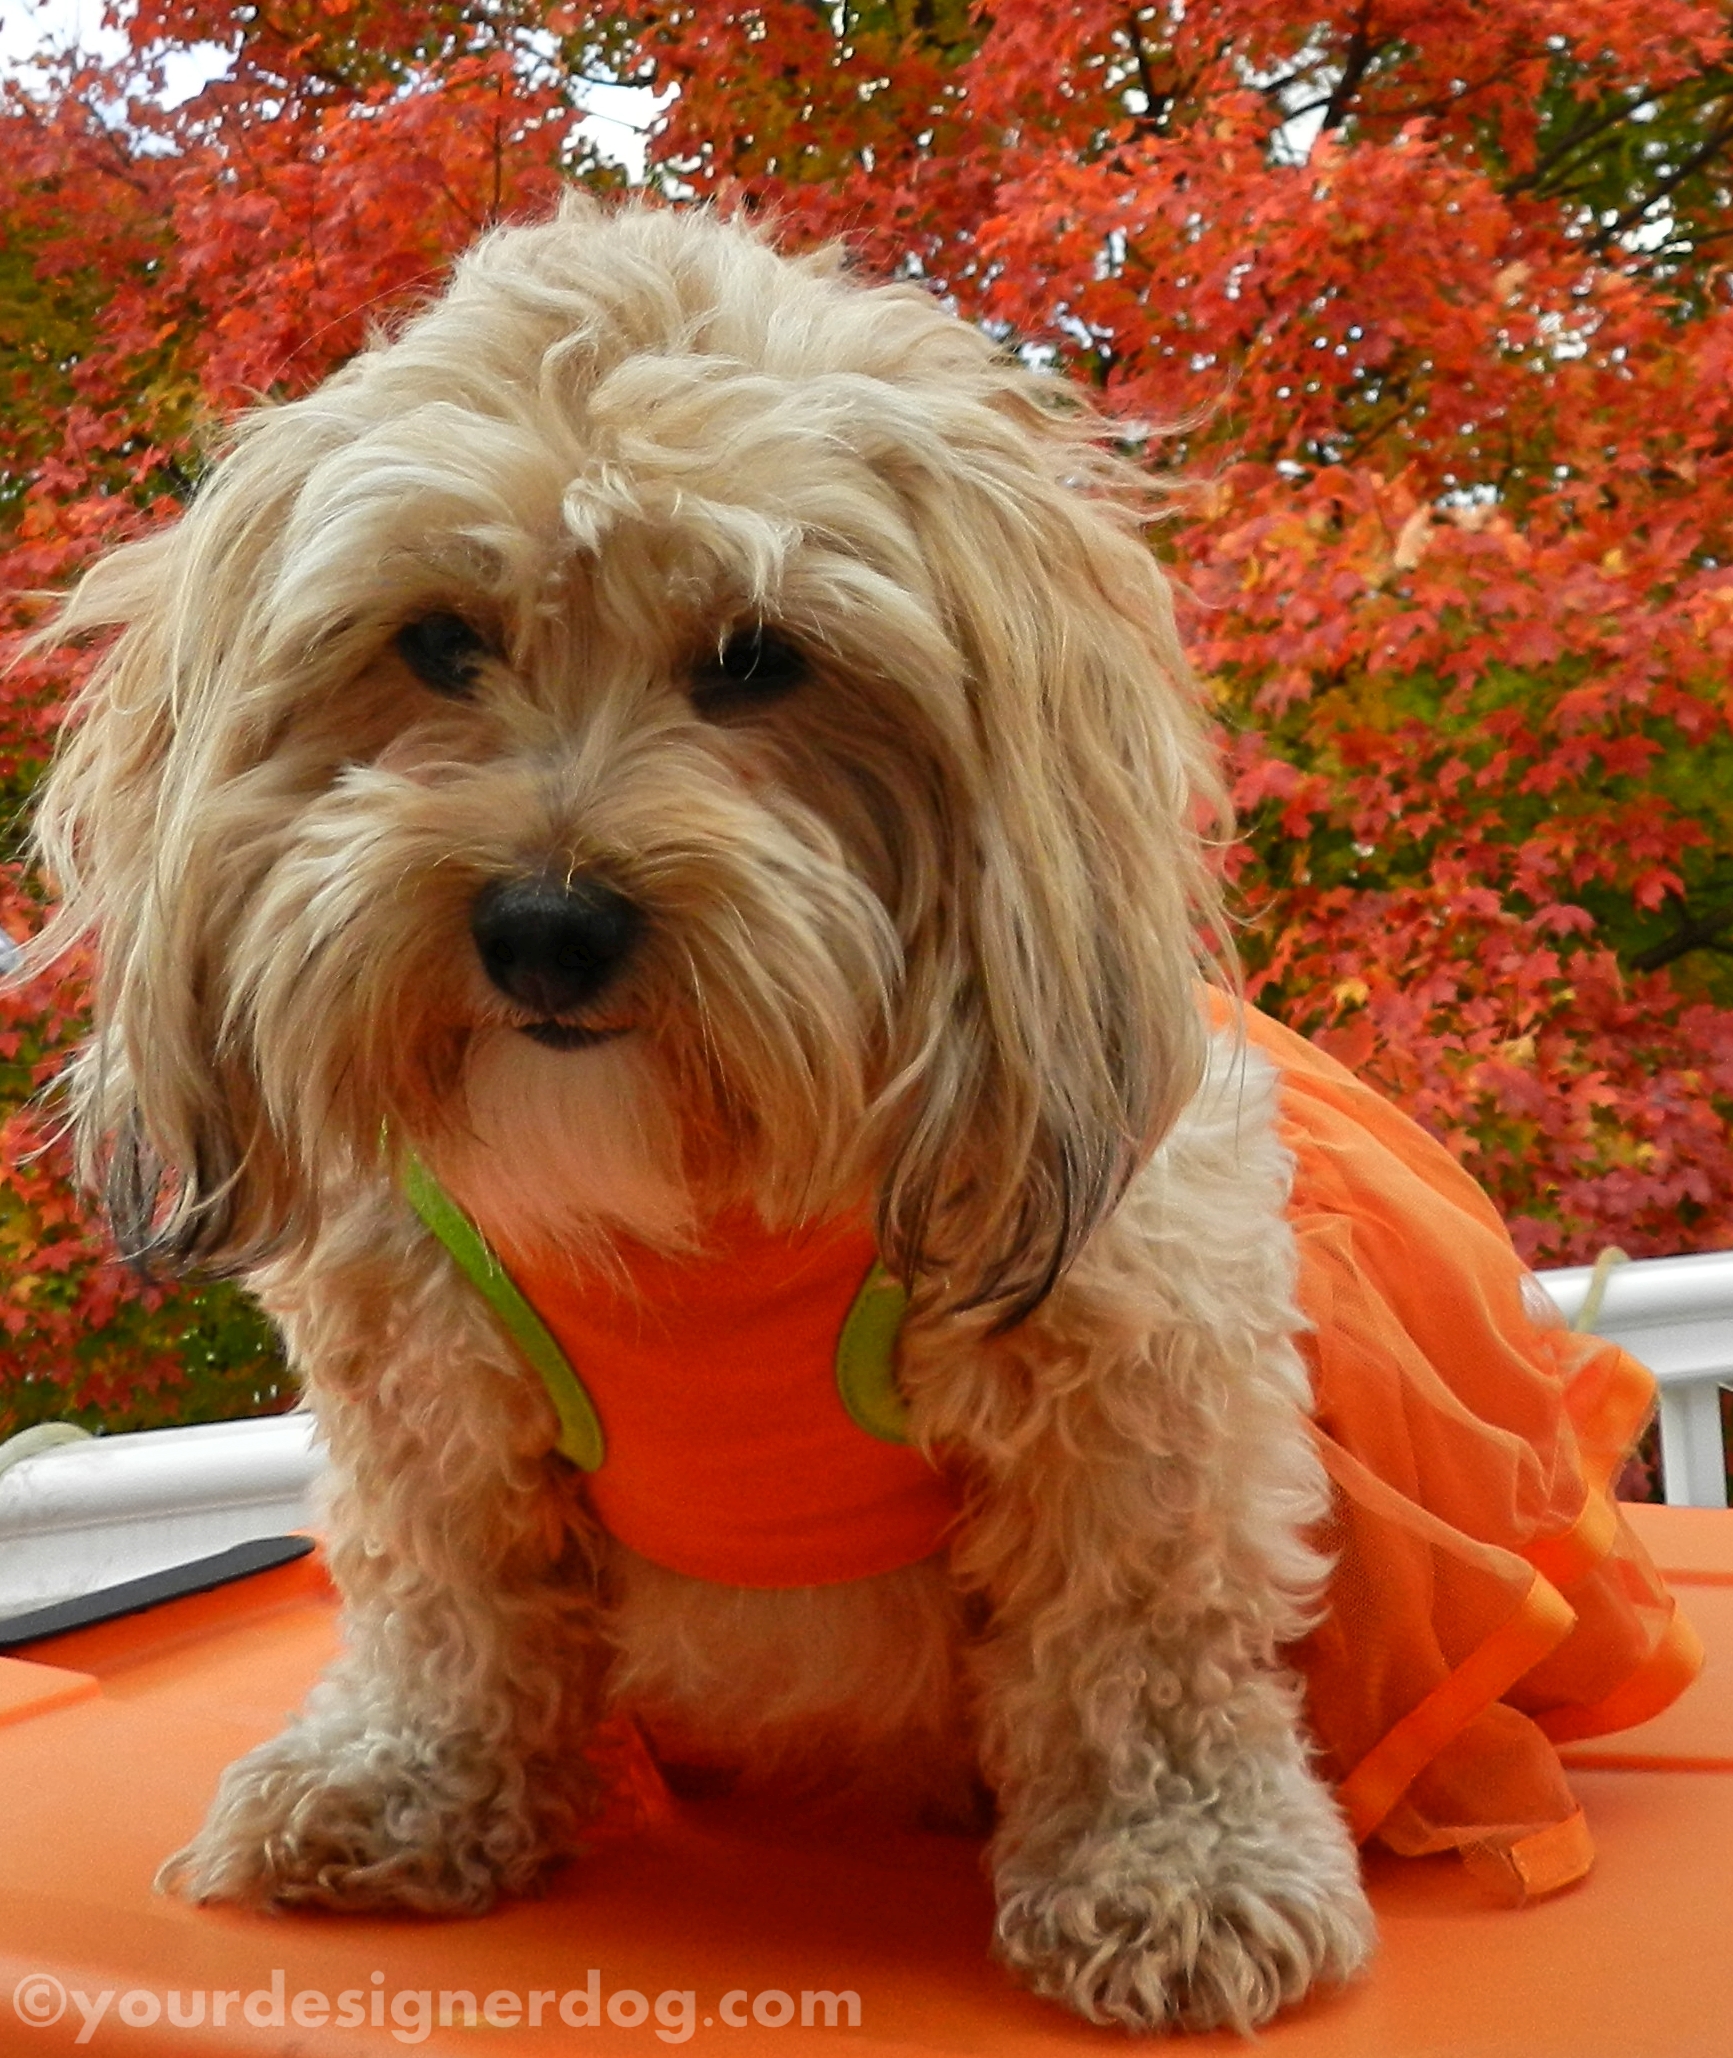 dogs, designer dogs, yorkipoo, yorkie poo, leaves, autumn, fall